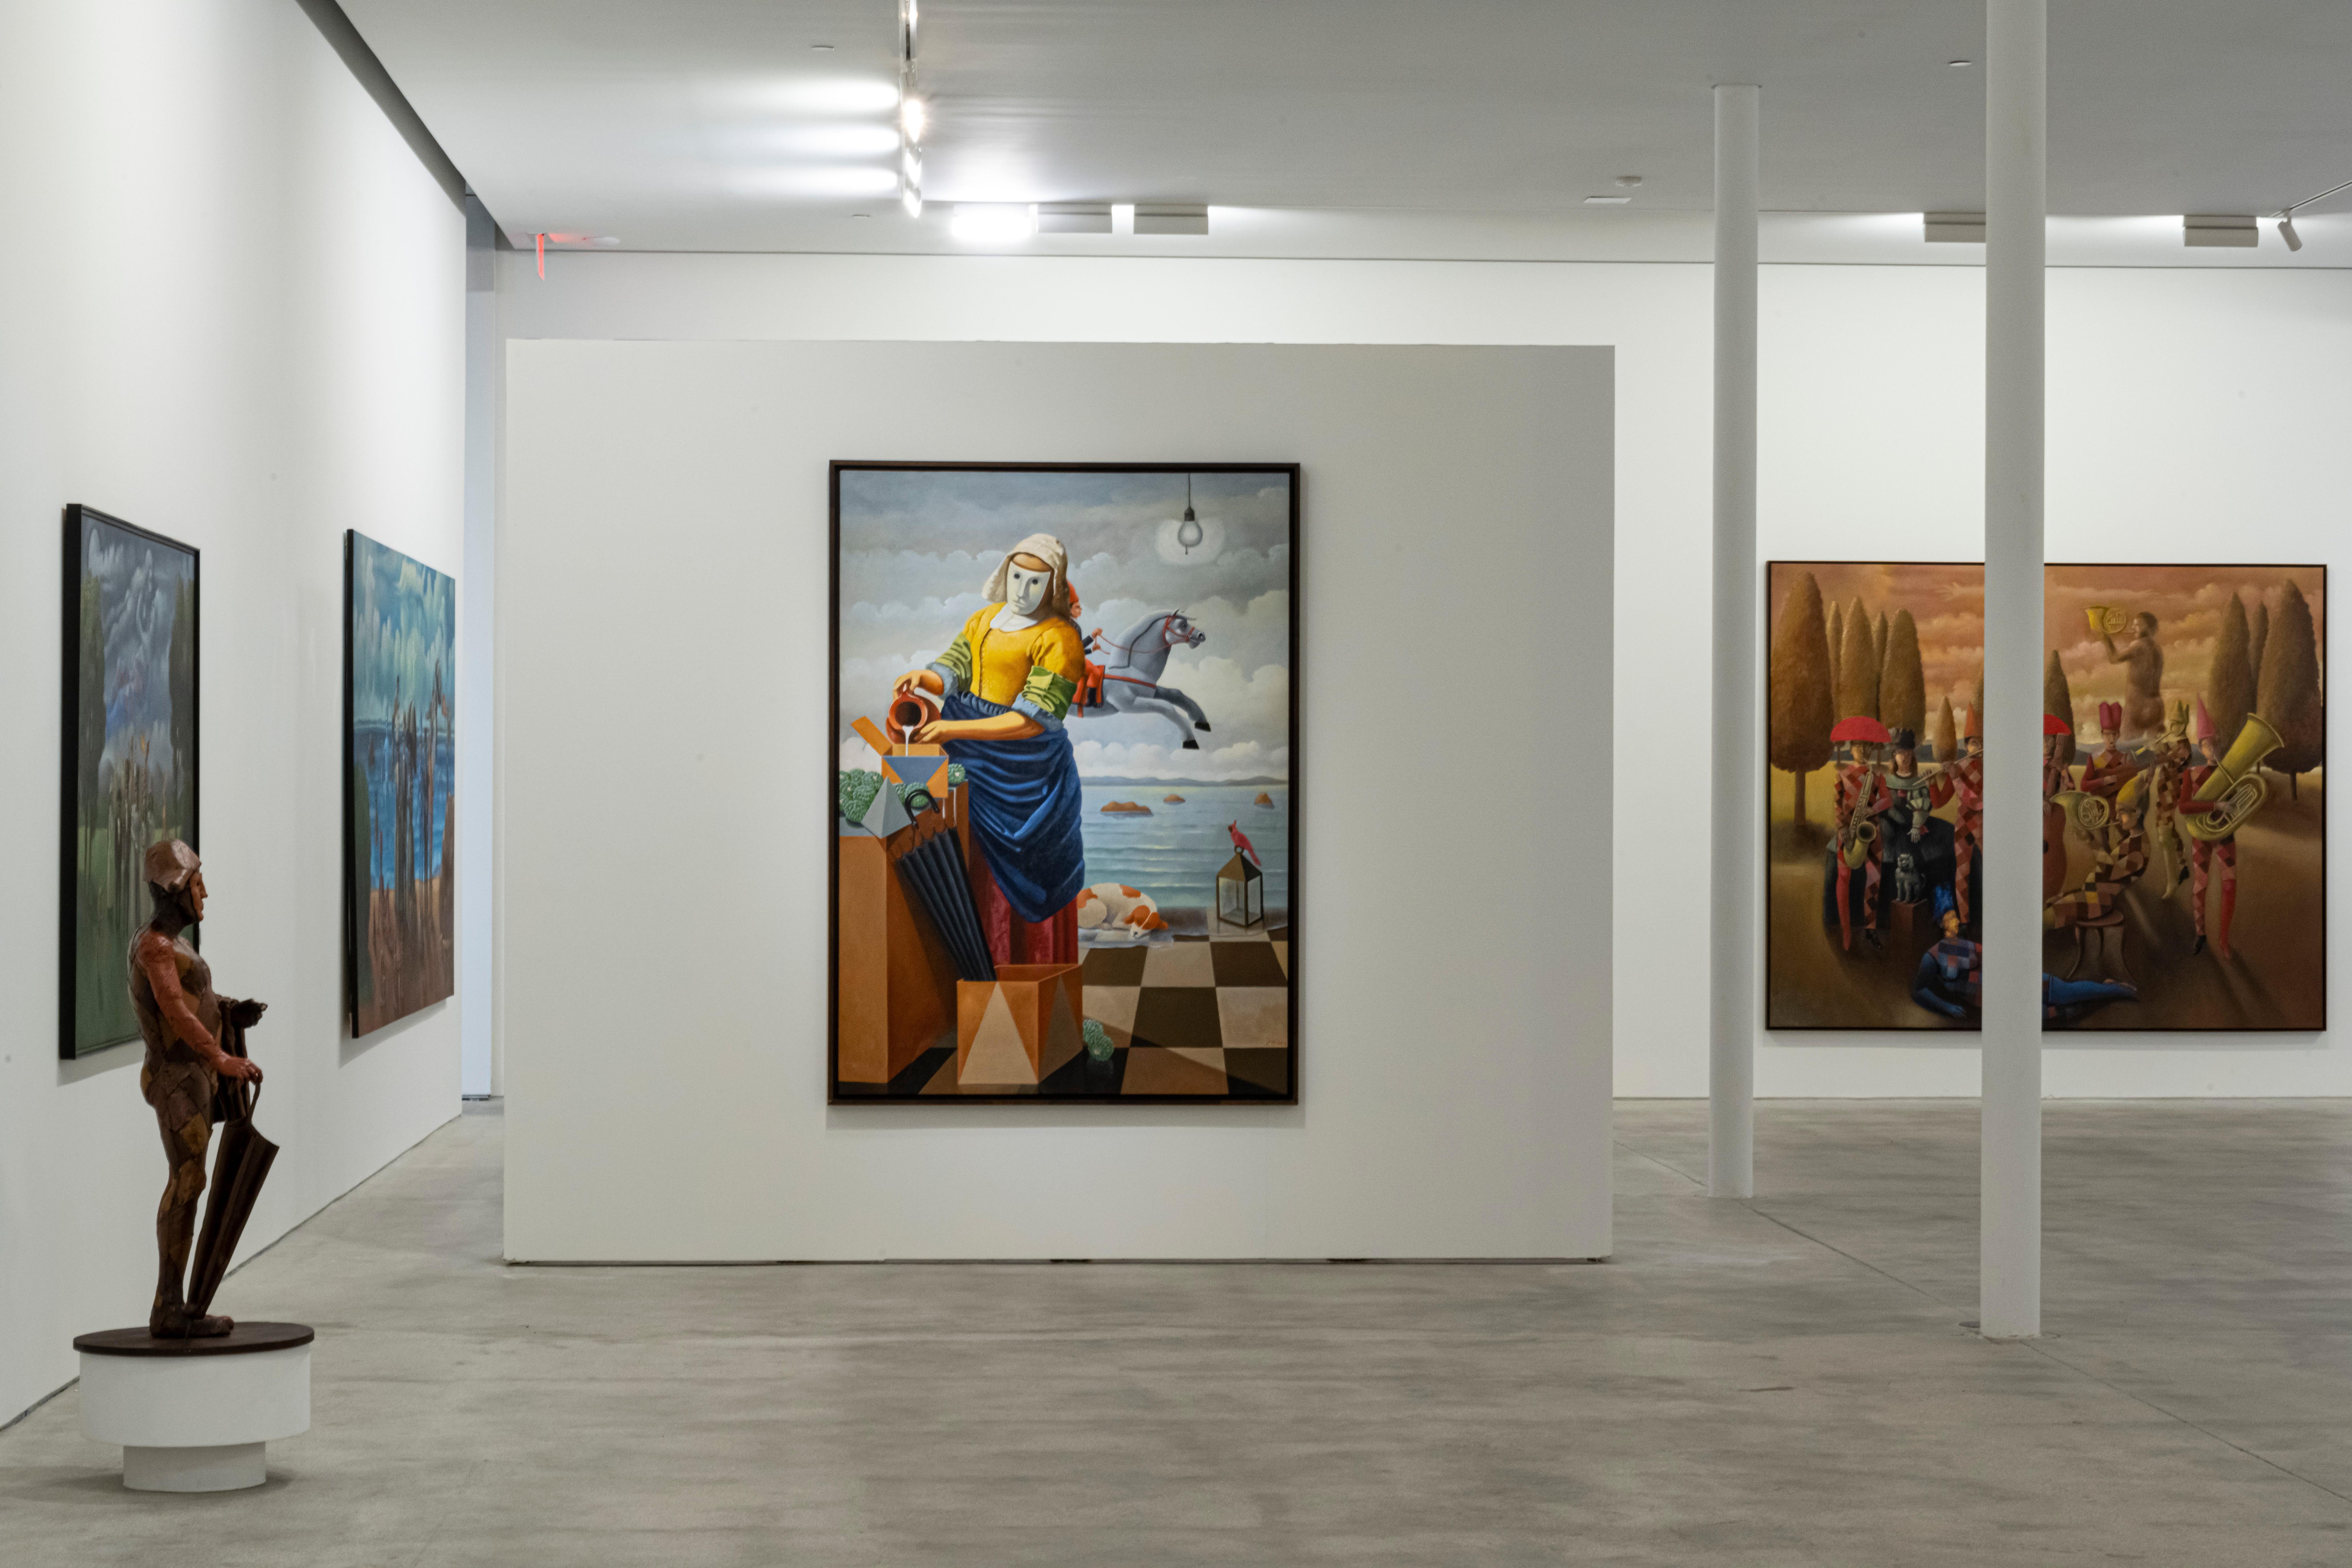 Carmelo Niño
Lechera, 2014 
Oil on canvas
207 x 149 cm
81.4 x 58.6 in.

The work is accompanied by a certificate of authenticity signed by the artist.

Carmelo Niño, a Venezuelan artist originally from Maracaibo, Zulia State, an oil-producing region